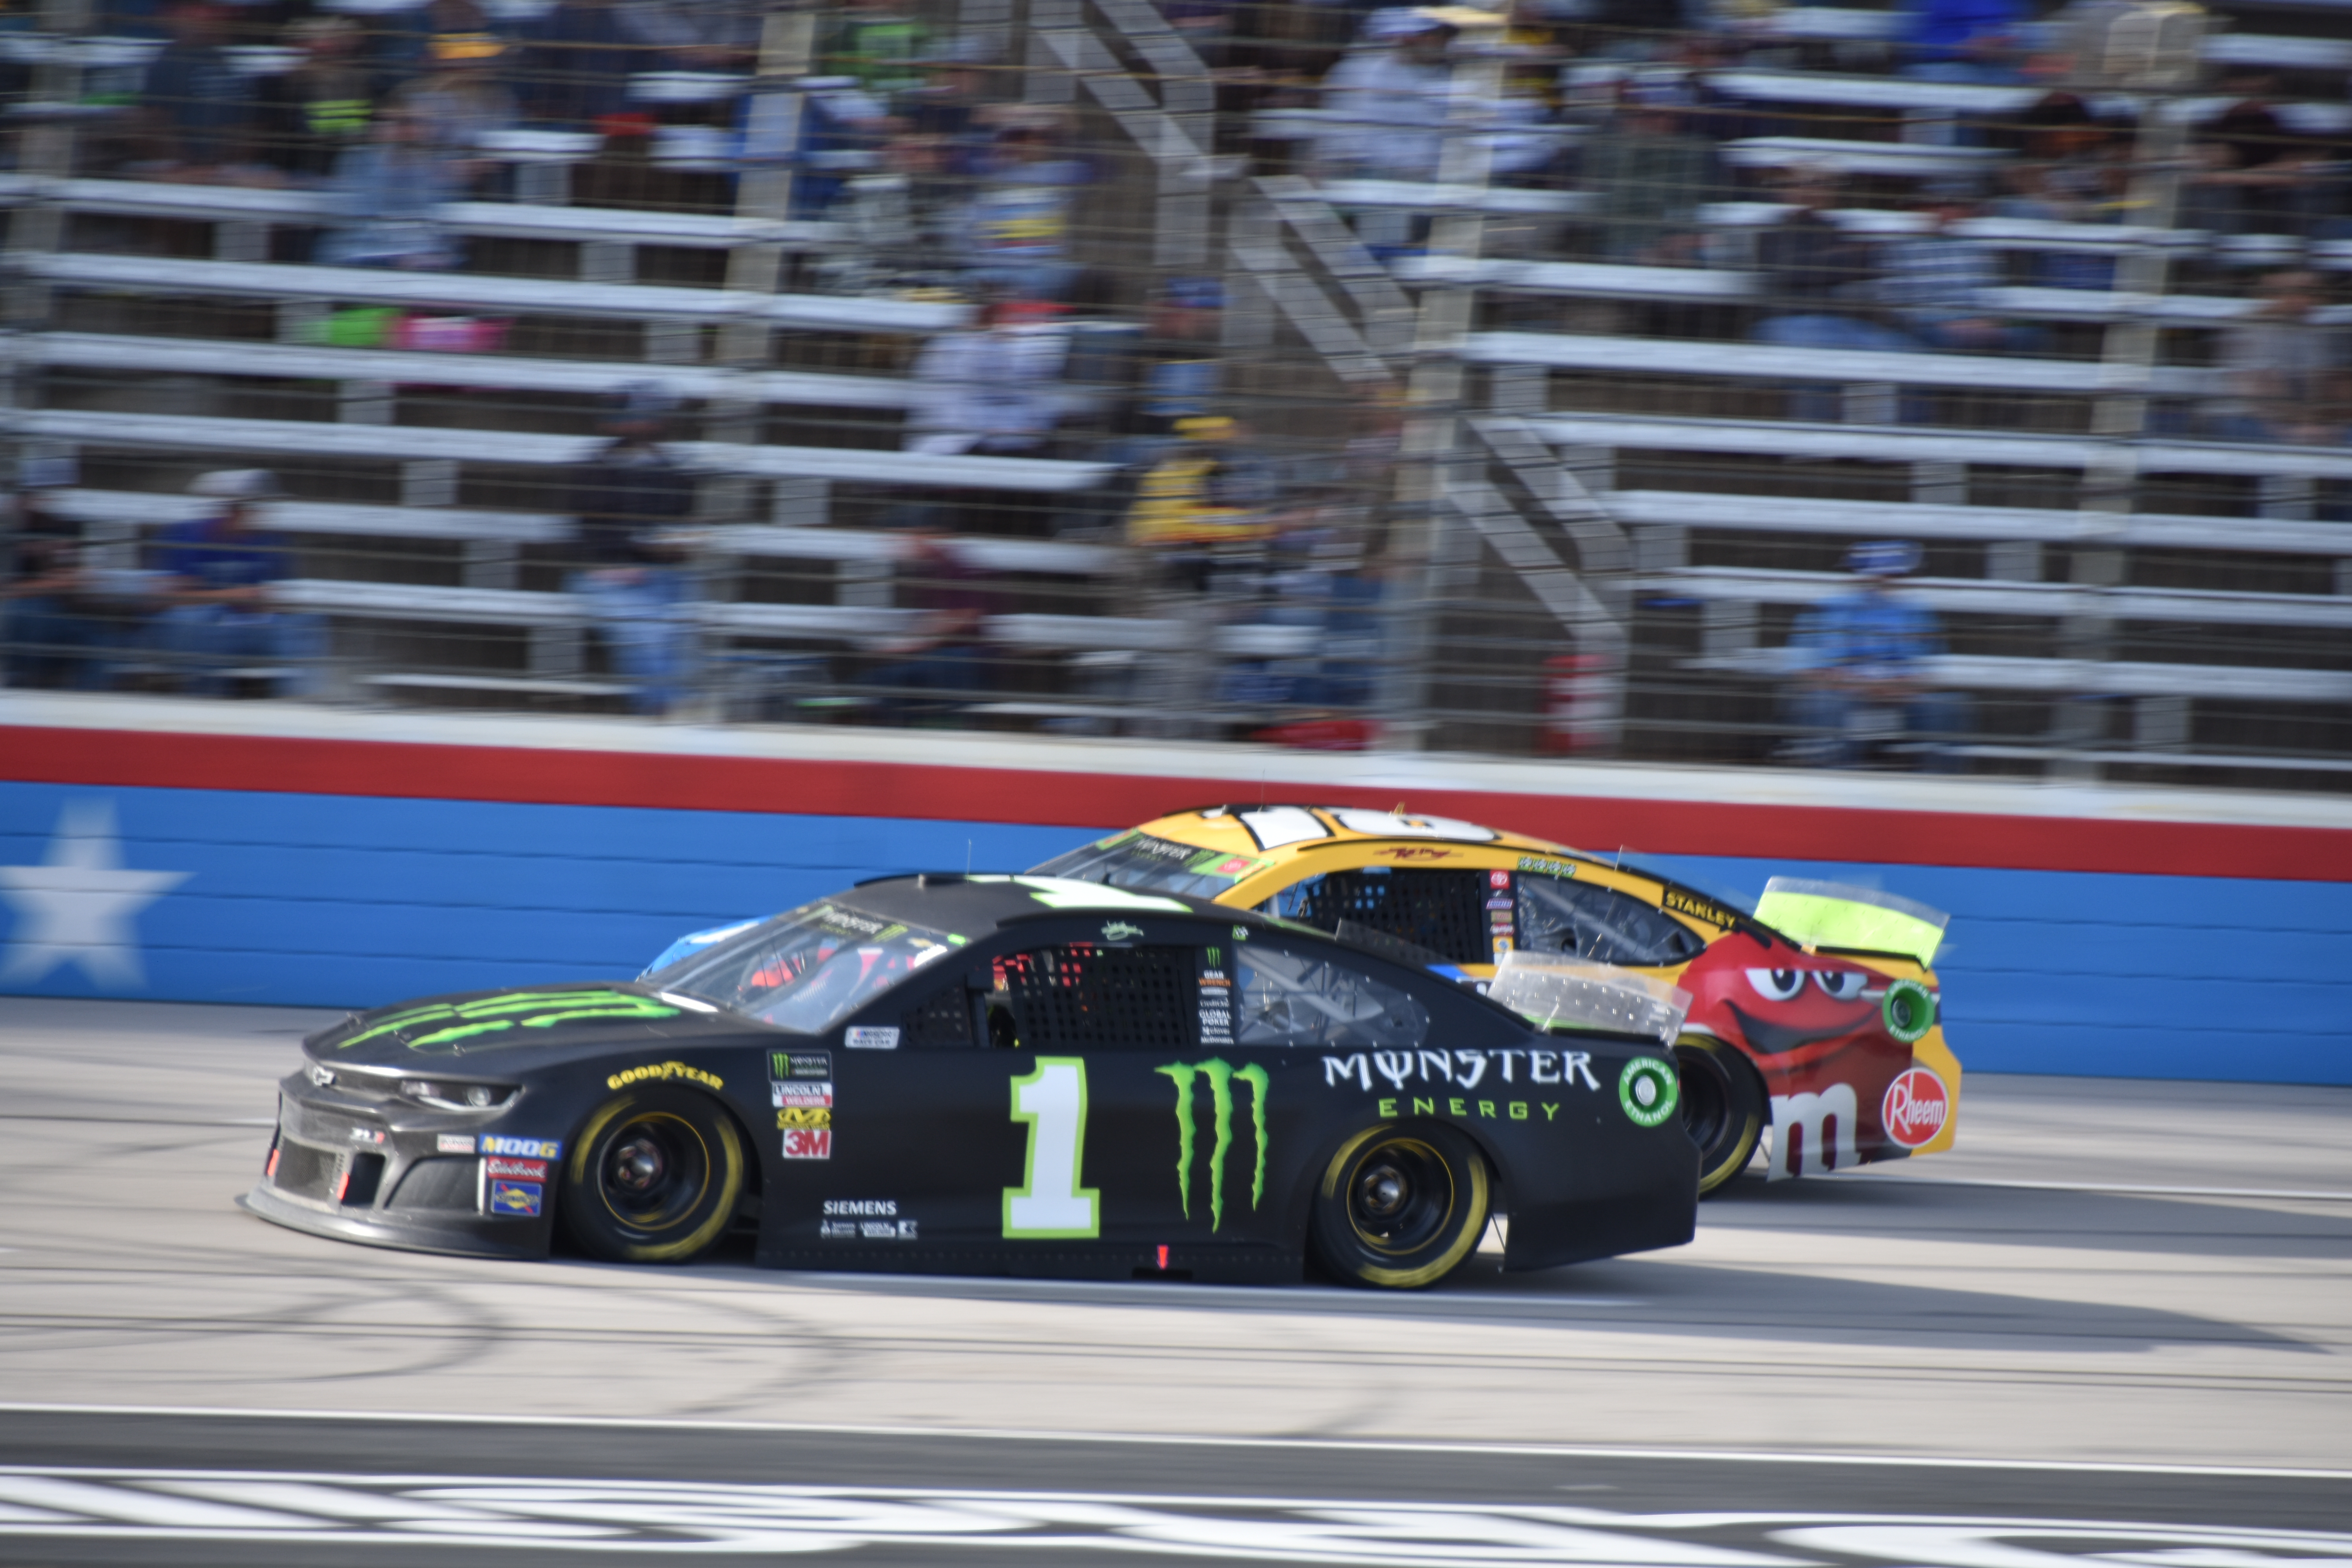 In any case, Kurt Busch and the No. 1 Monster Energy Chevy continue their quest for a title for a couple of years. (Photo Credit: Sean Folsom/TPF)